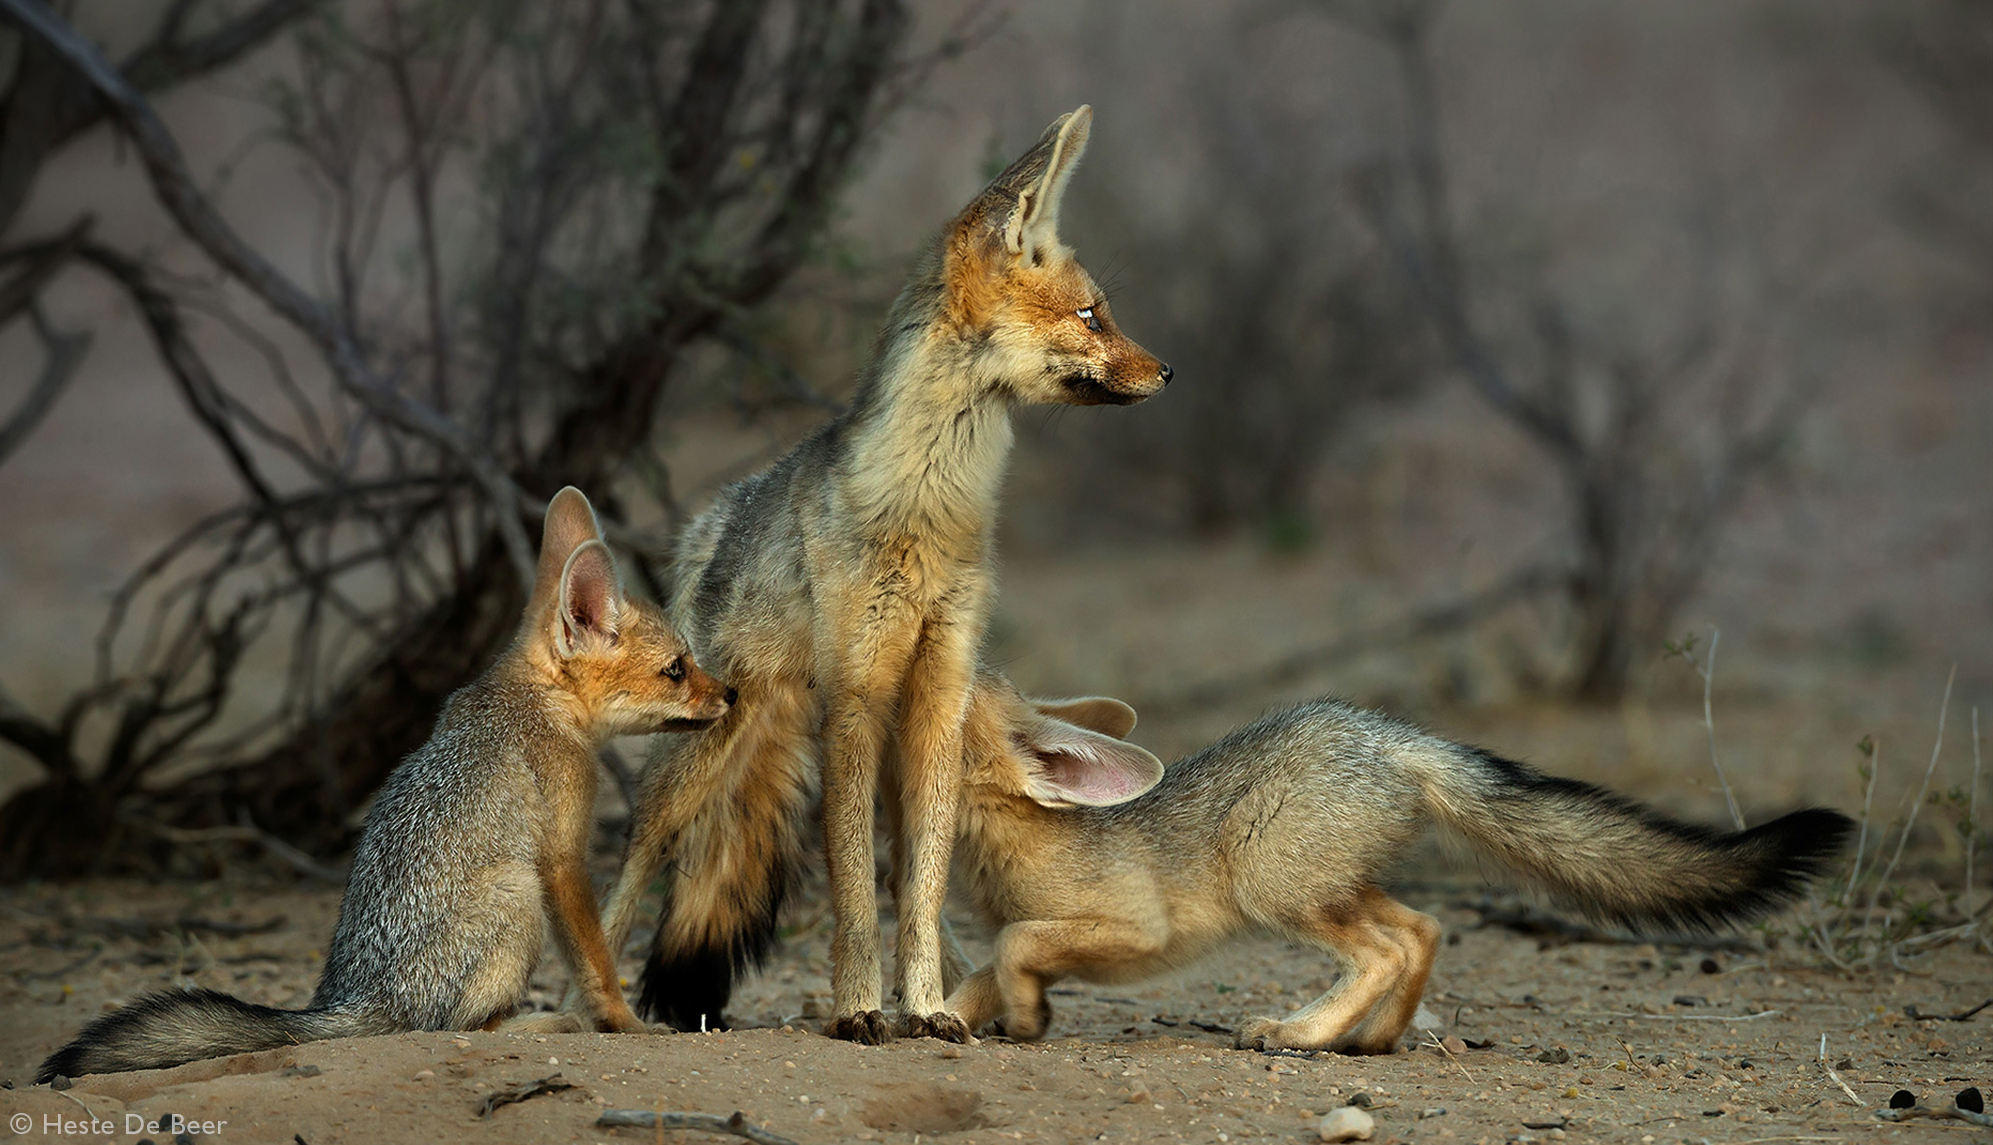 Two juvenile Cape foxes suckle on their mother in Kalahari Gemsbok National Park, South Africa